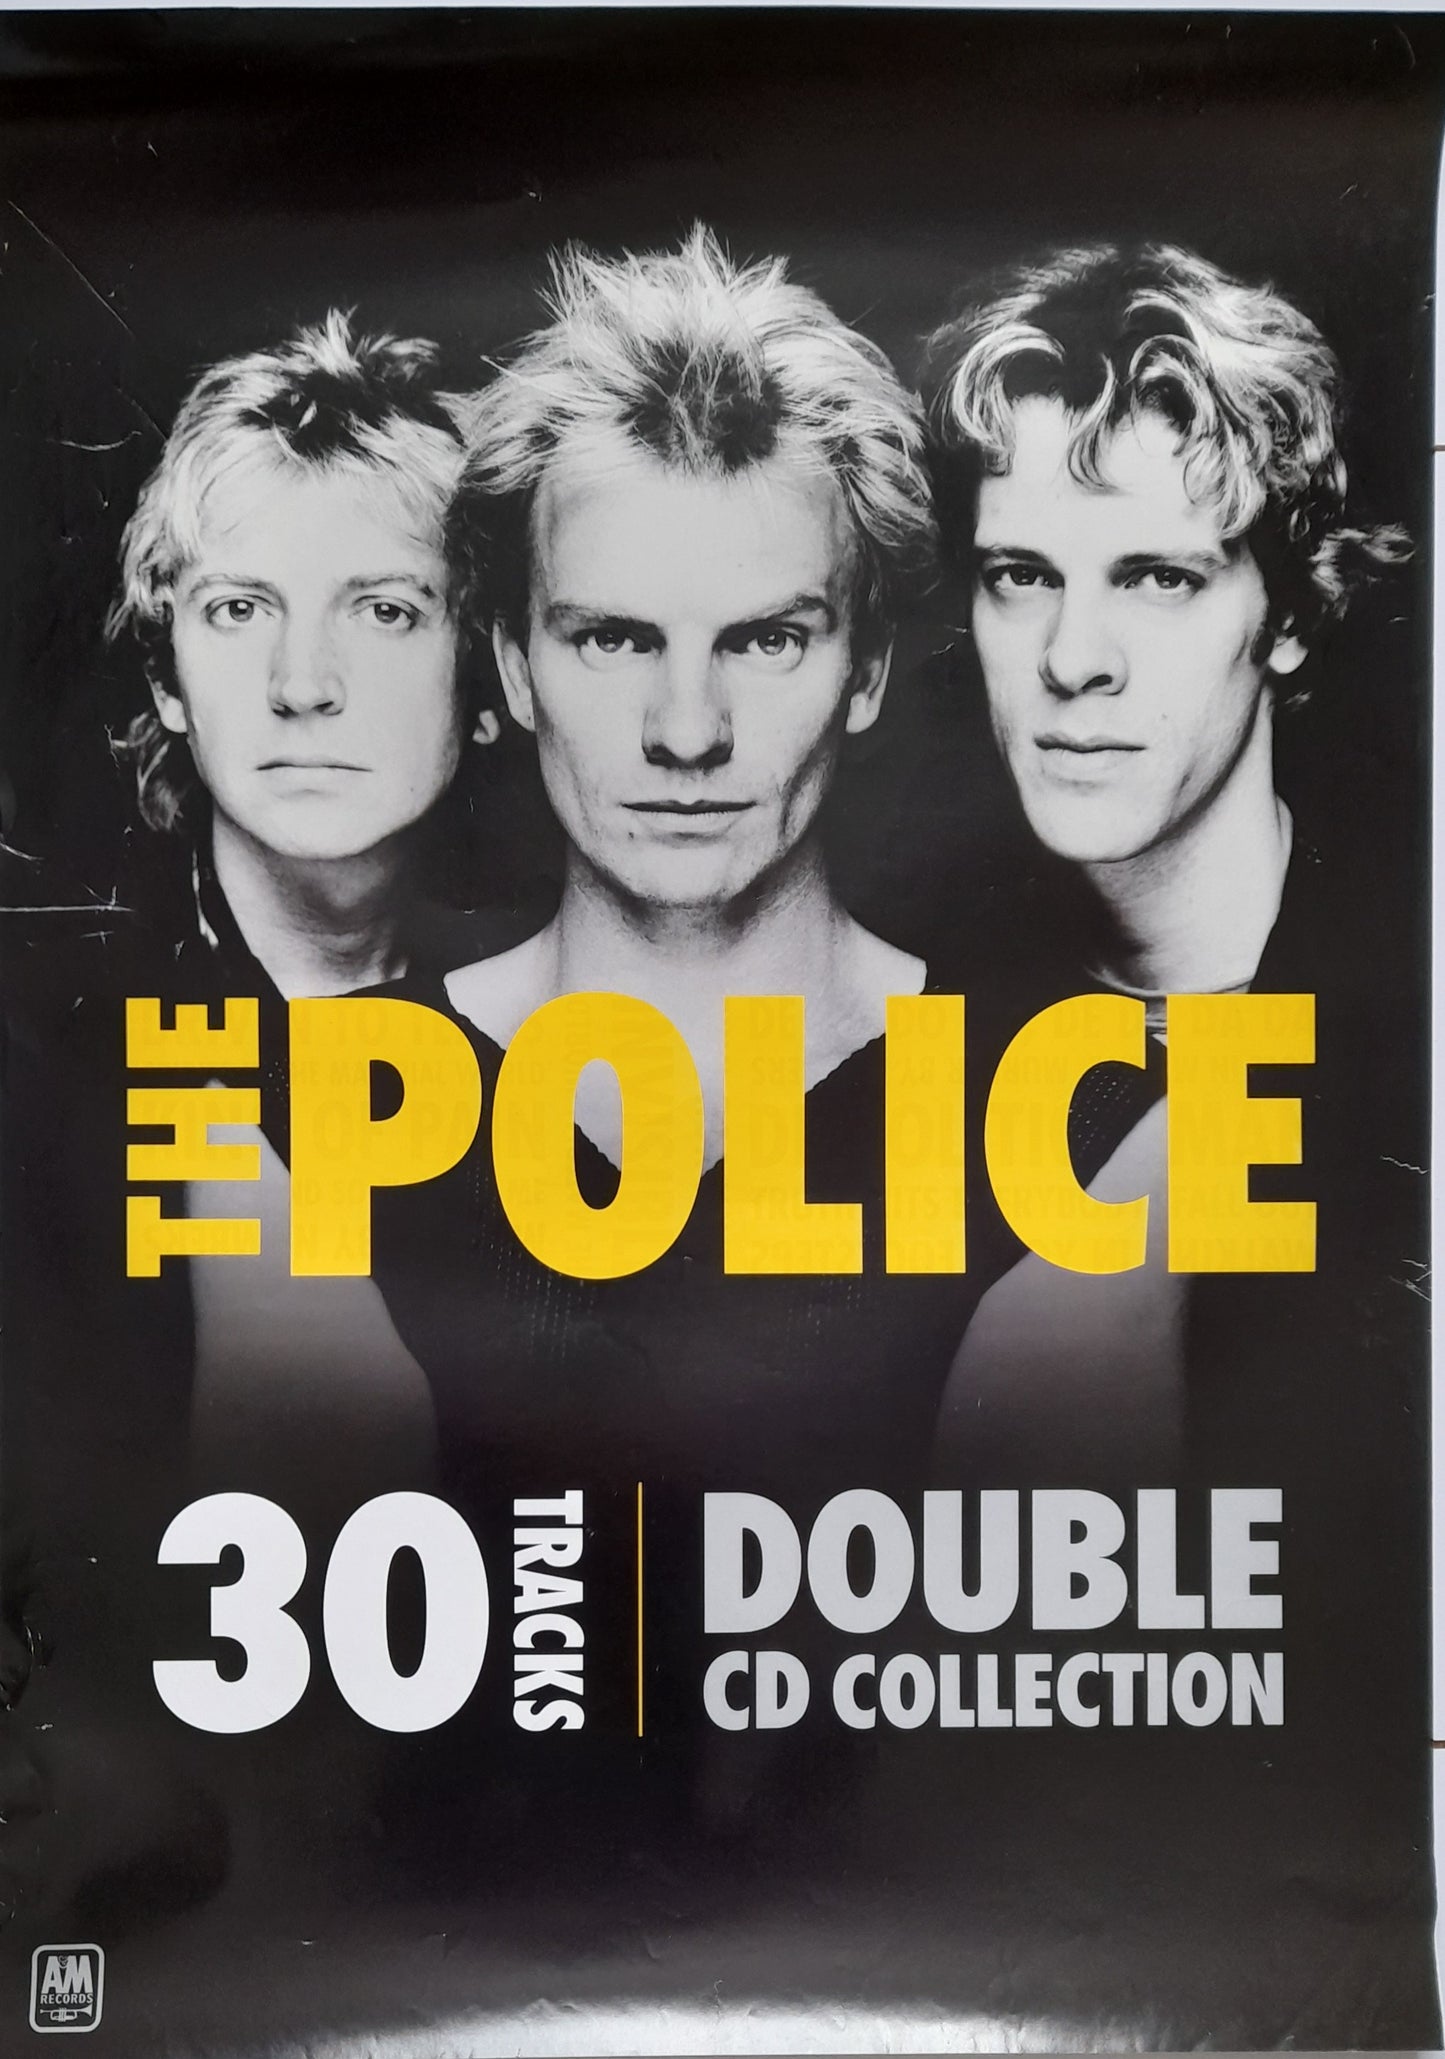 The Police 30 Track Double CD UK Promotional Poster